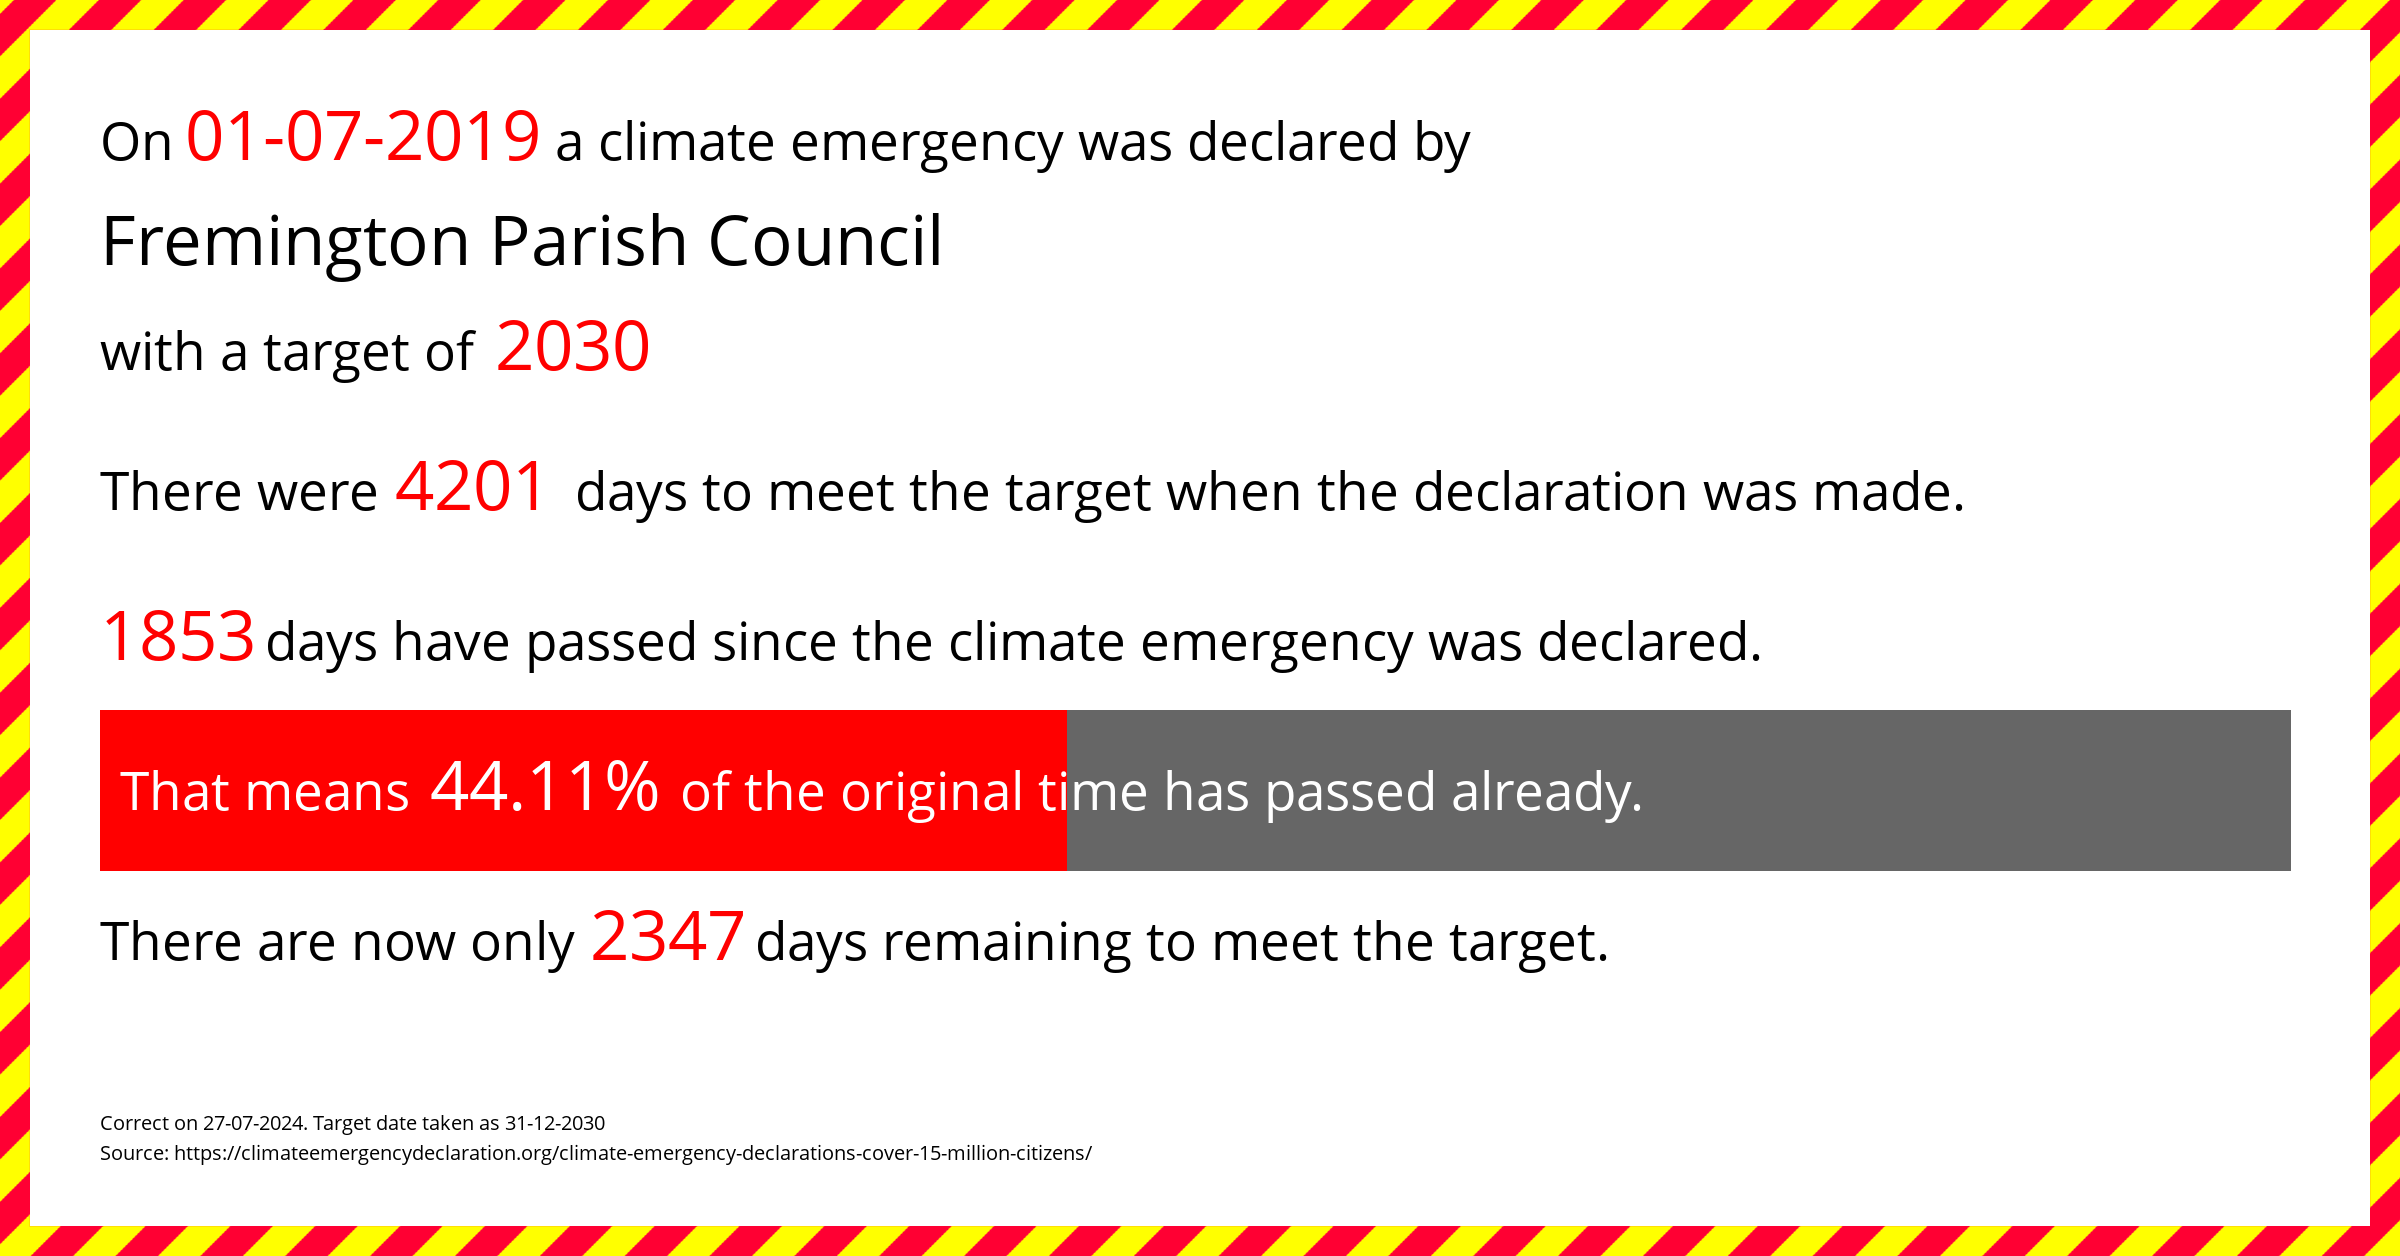 Fremington Parish Council  declared a Climate emergency on Monday 1st July 2019, with a target of 2030.